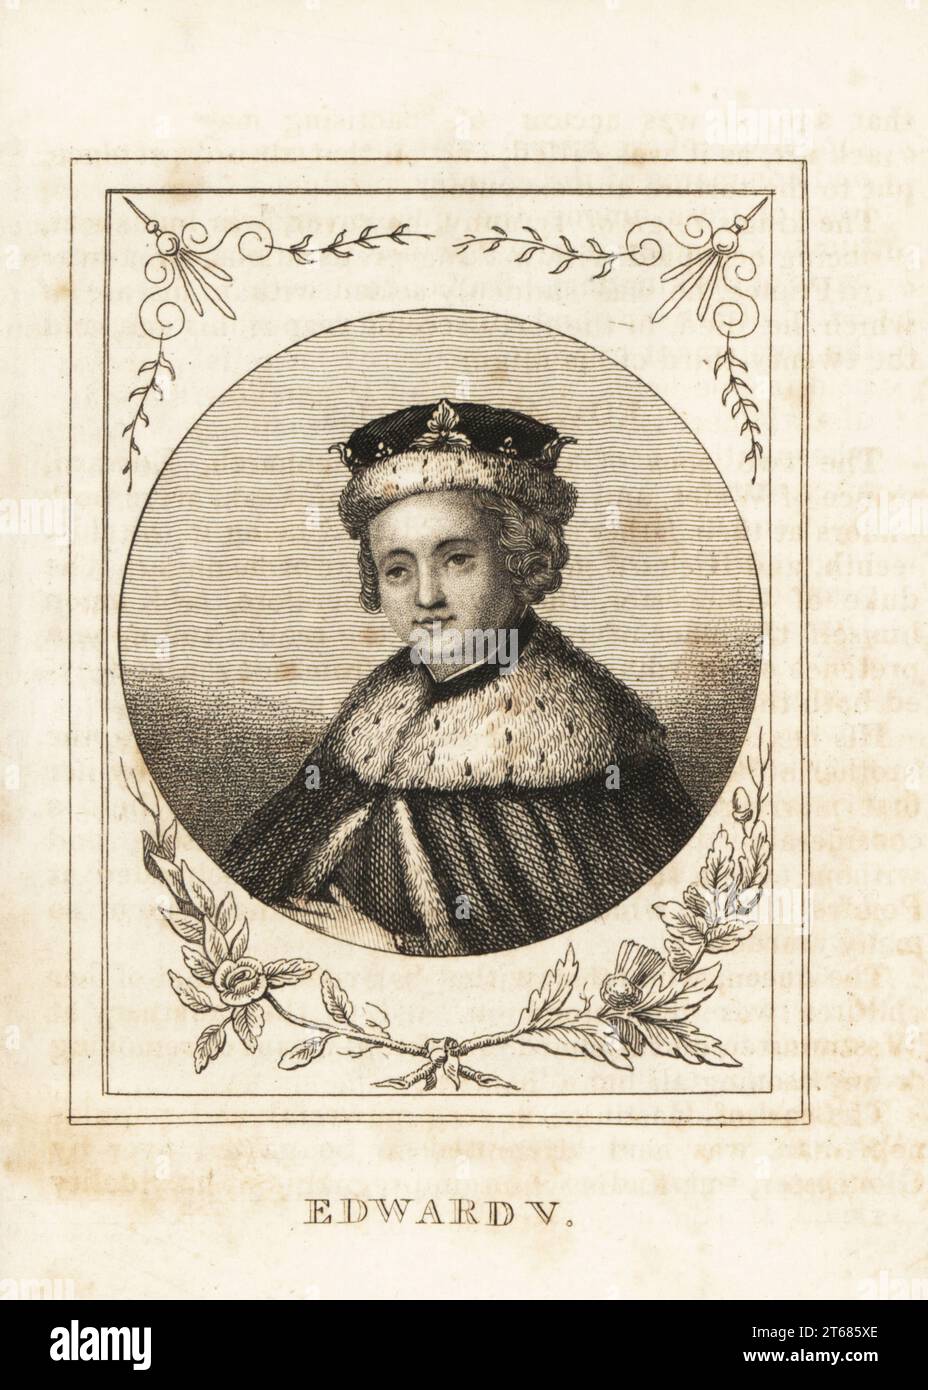 Portrait of King Edward V of England, 1470-1483, in ermine crown, ermine mantle. Copperplate engraving from M. A. Jones History of England from Julius Caesar to George IV, G. Virtue, 26 Ivy Lane, London, 1836. Stock Photo